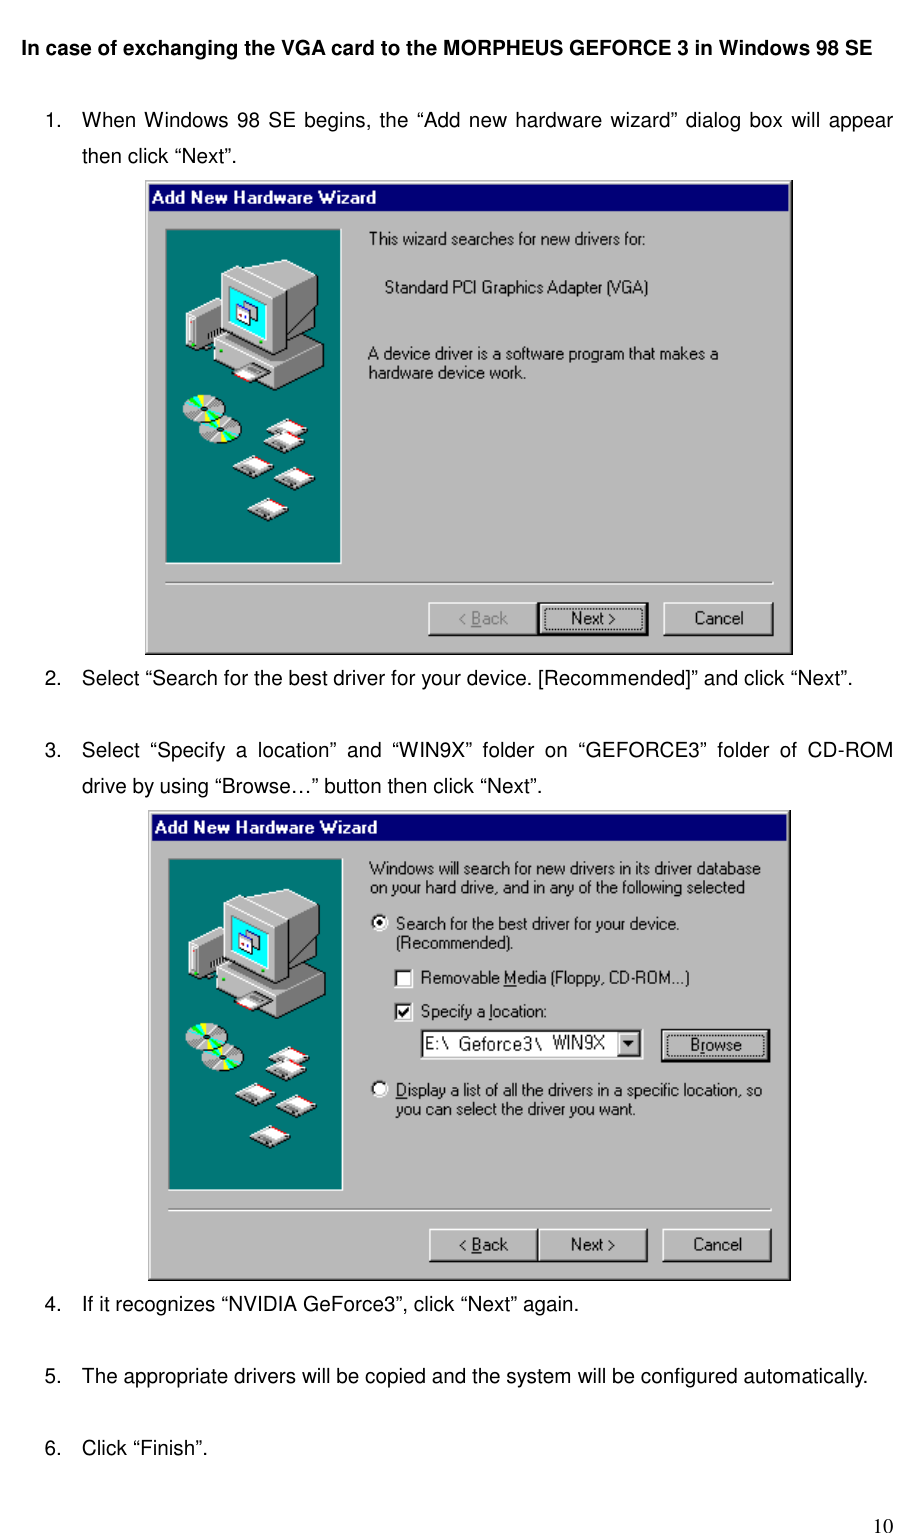     10 In case of exchanging the VGA card to the MORPHEUS GEFORCE 3 in Windows 98 SE   1.  When Windows 98 SE begins, the “Add new hardware wizard” dialog box will appear then click “Next”.  2.  Select “Search for the best driver for your device. [Recommended]” and click “Next”.  3.  Select “Specify a location” and “WIN9X” folder on “GEFORCE3” folder of CD-ROM drive by using “Browse…” button then click “Next”.  4.  If it recognizes “NVIDIA GeForce3”, click “Next” again.  5.  The appropriate drivers will be copied and the system will be configured automatically.  6. Click “Finish”.  